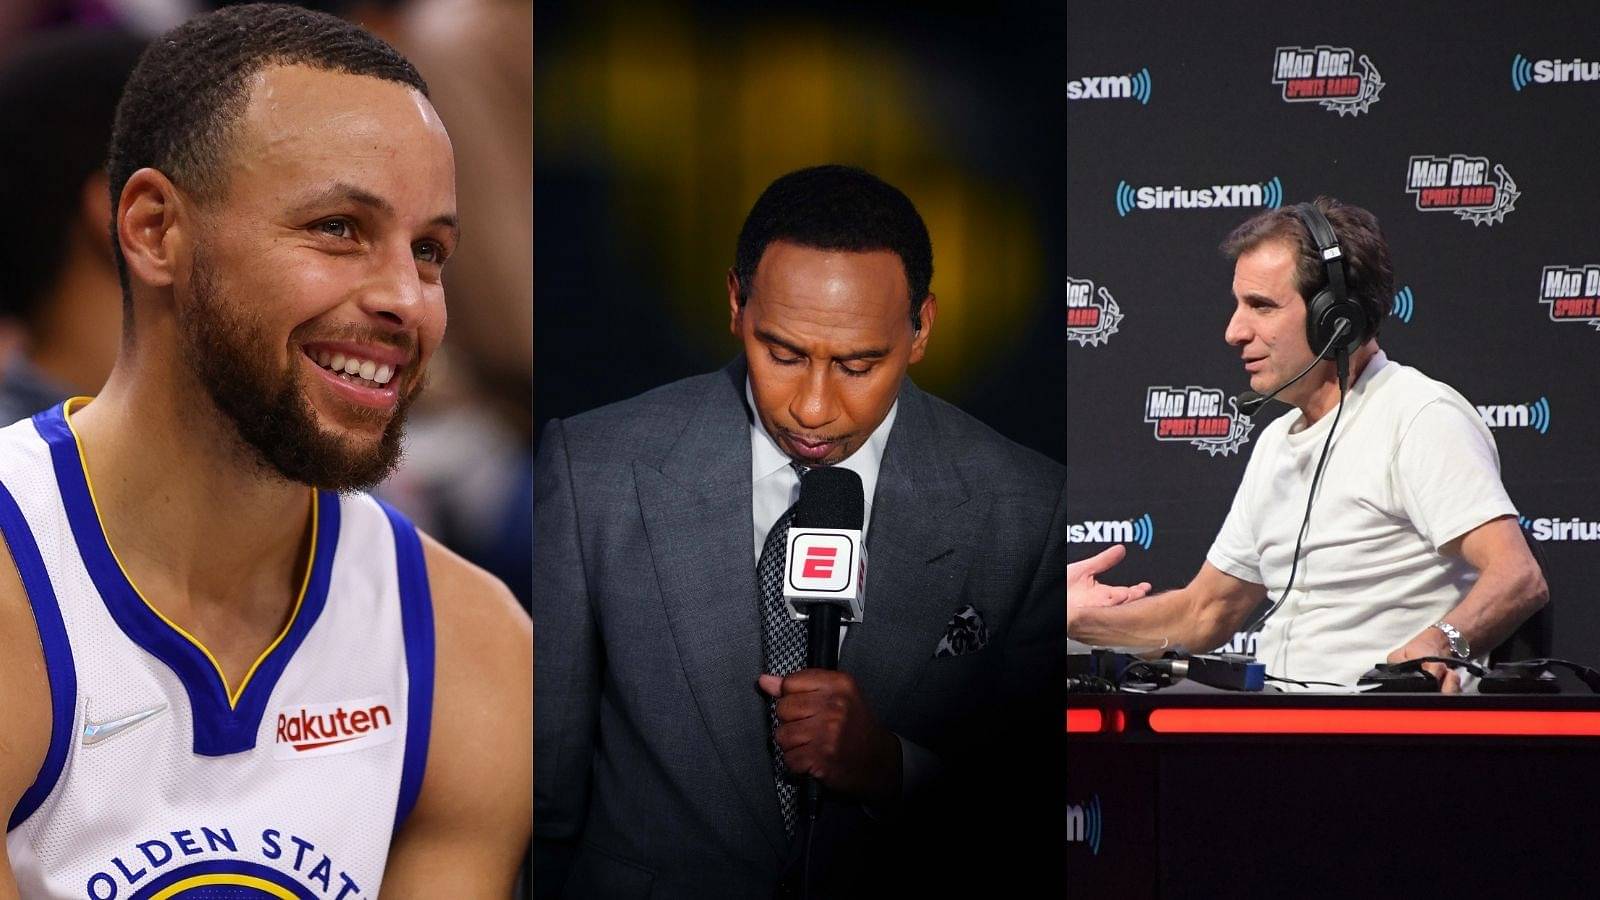 “Your life is on the line! Who you got Stephen A Smith? Bill Russell or Stephen Curry??”: Chris "Mad dog" Russo tears ESPN's veteran analyst apart in his own backyard